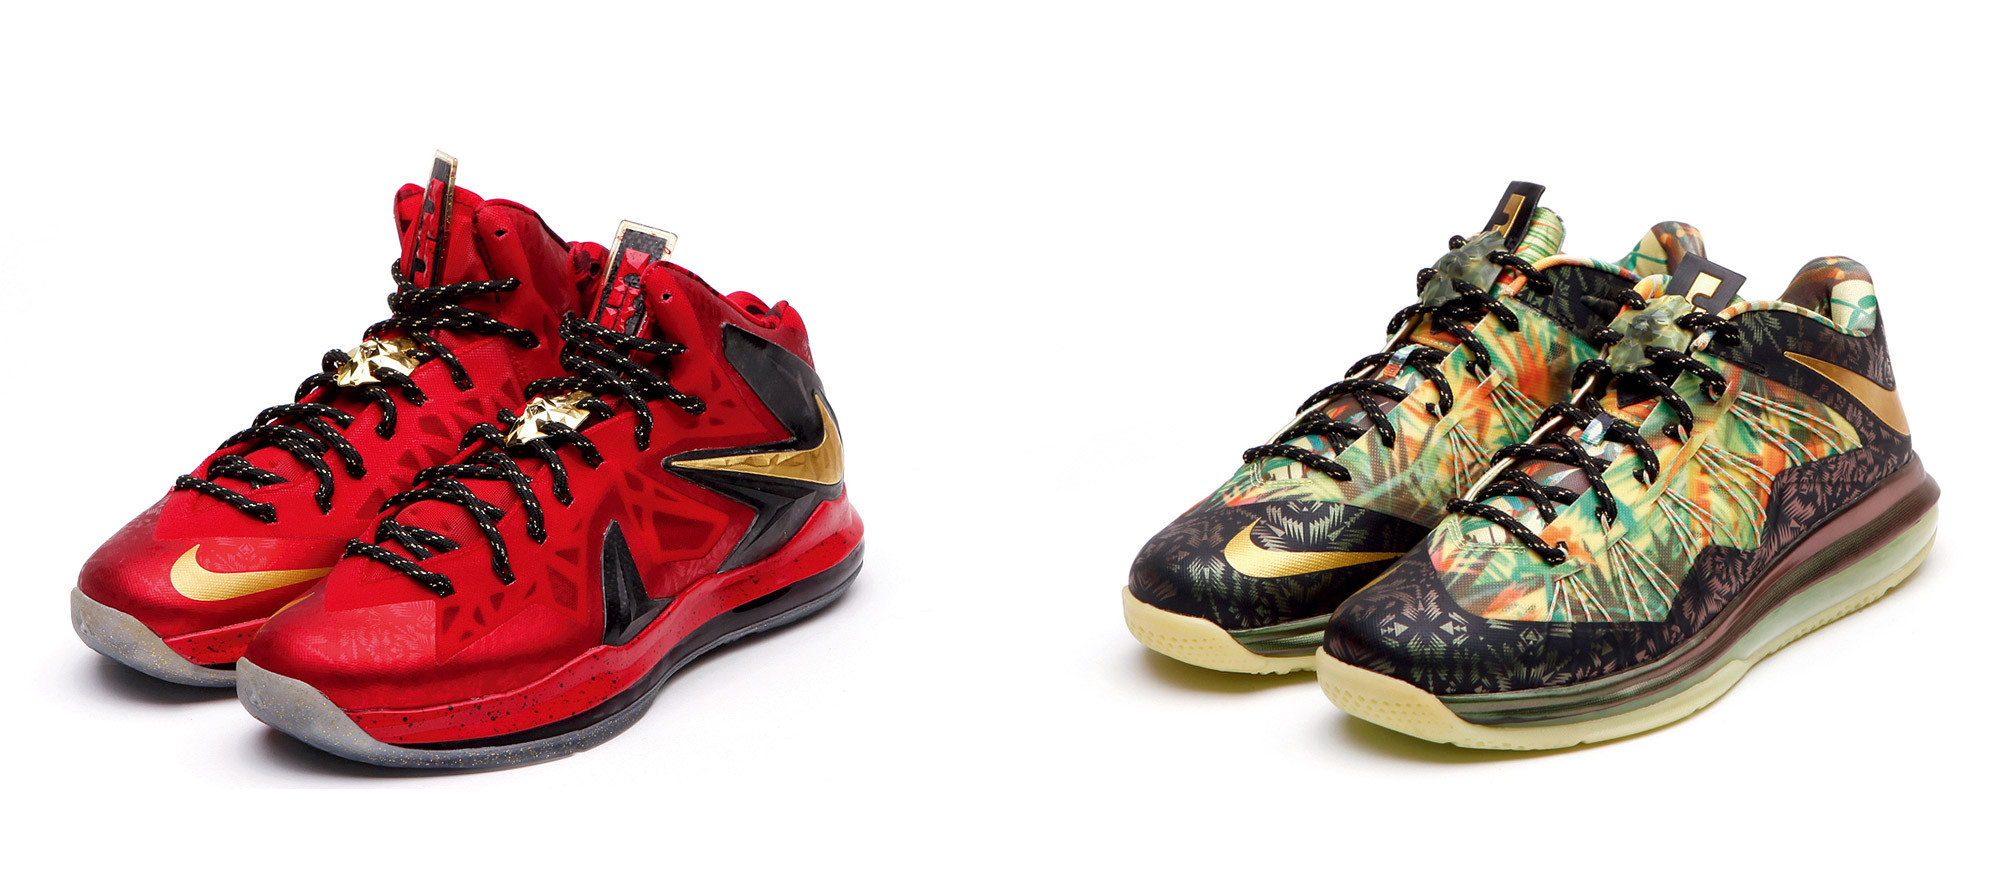 Nike LEBRON X P.s. elite“championship pack” Collection